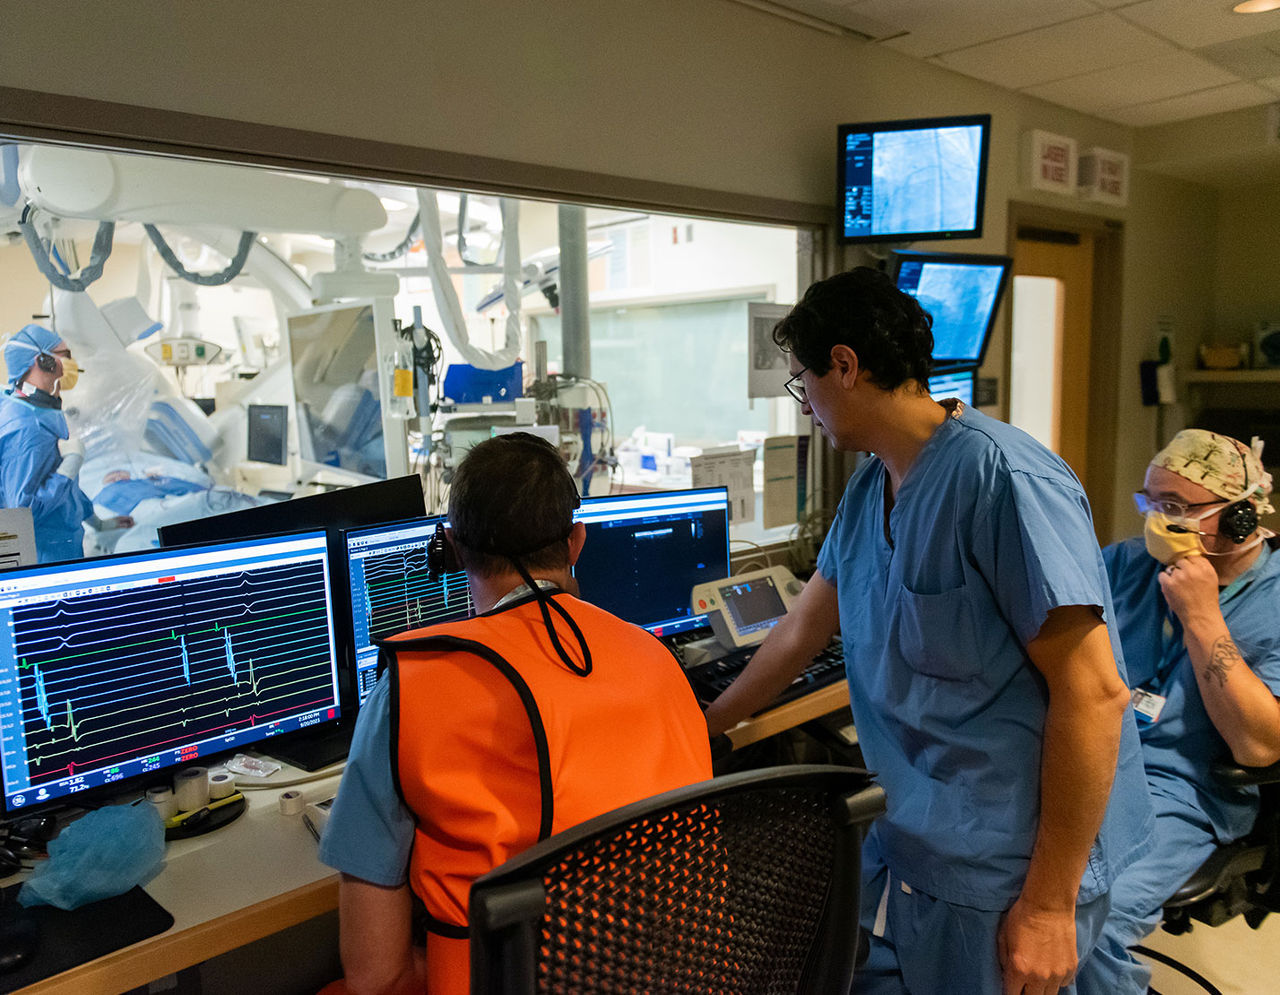 members of the heart care team outside operating room monitoring patient during surgery